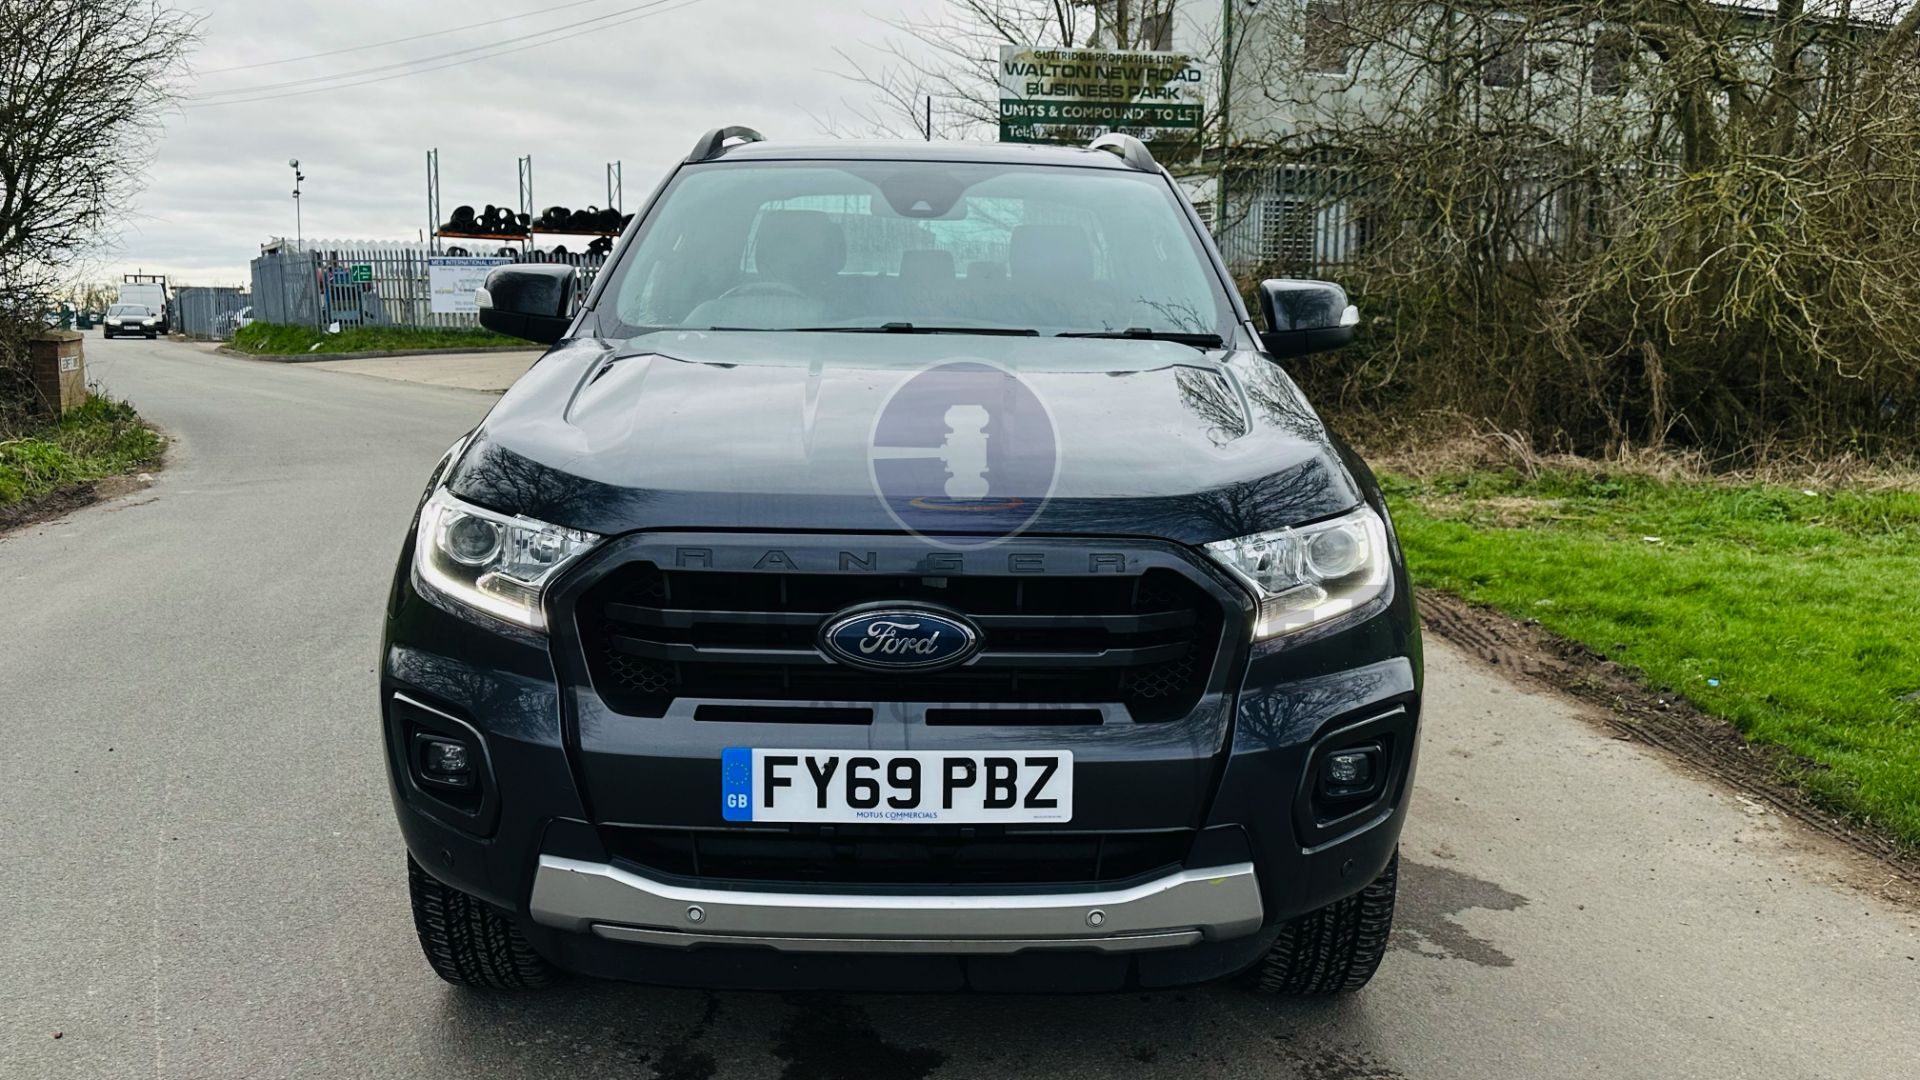 (On Sale) FORD RANGER *WILDTRAK EDITION* DOUBLE CAB PICK-UP (69 REG - EURO 6) 3.2 TDCI - AUTOMATIC - Image 4 of 49